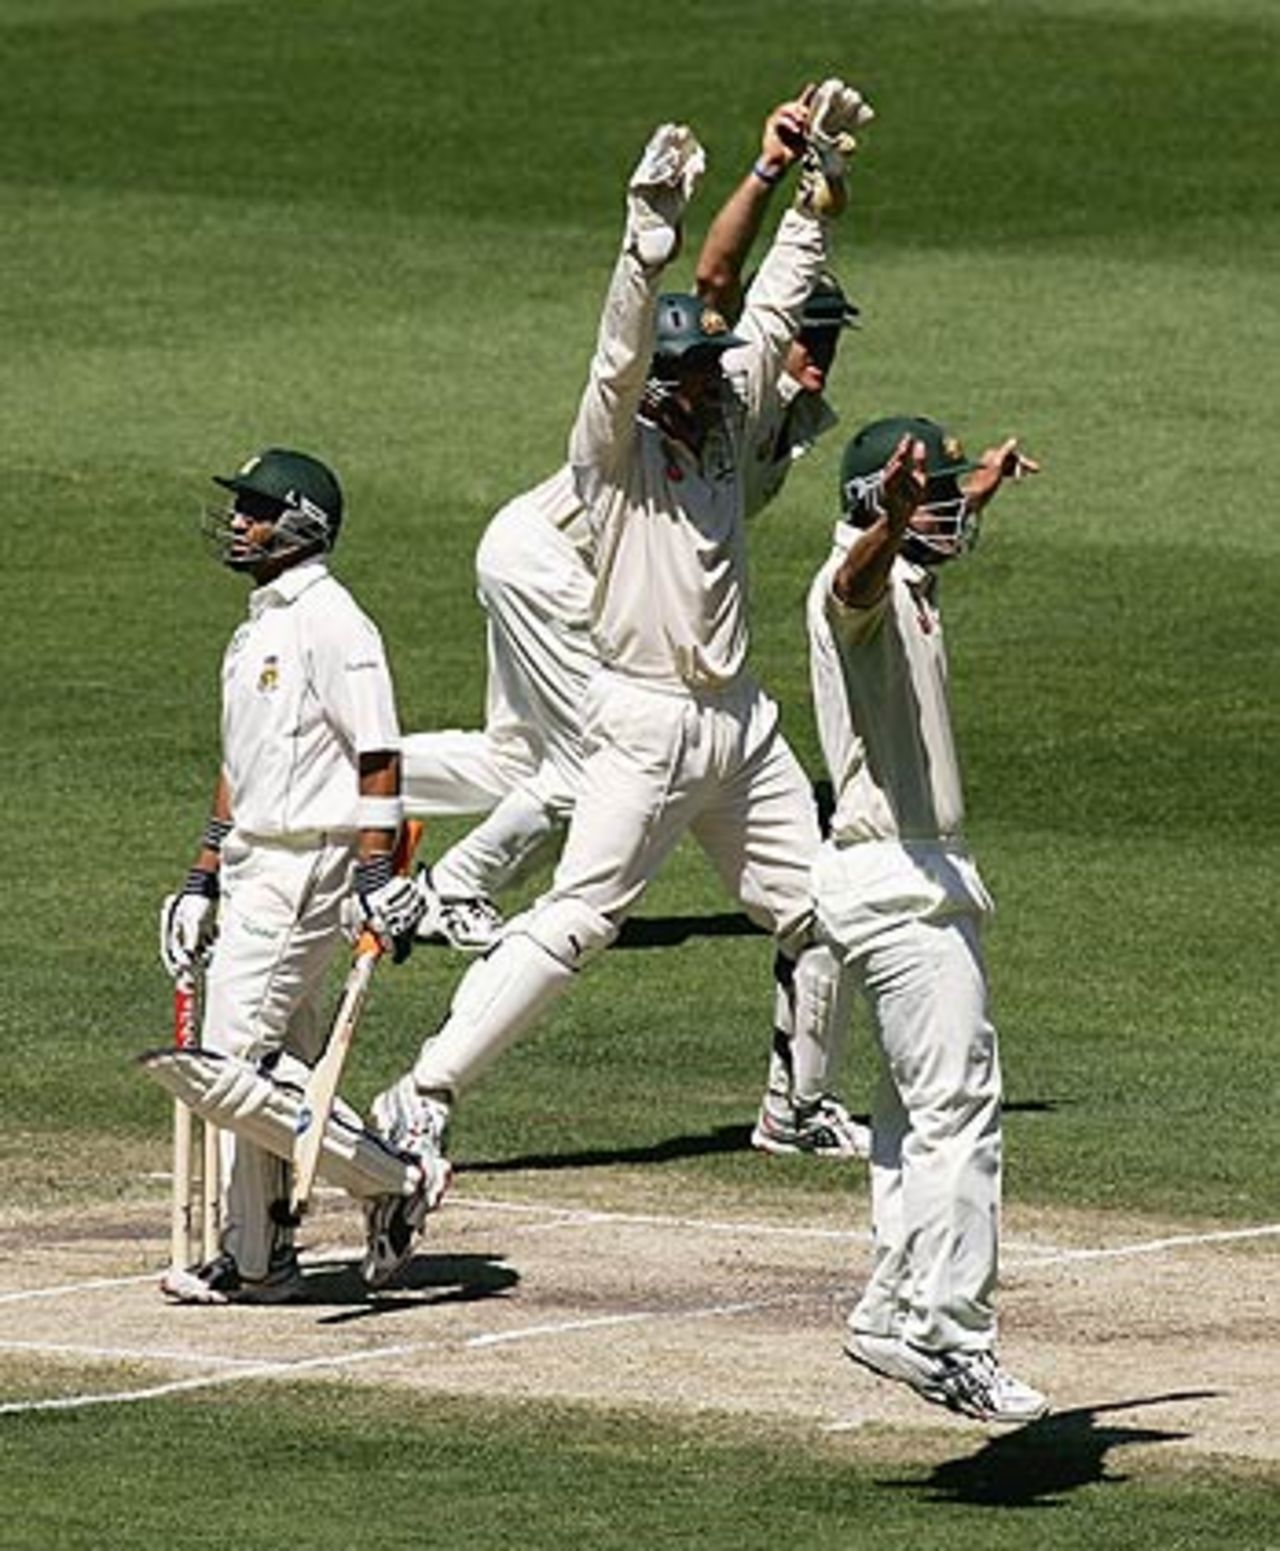 Australian fielders celebrate the wicket of Ashwell Prince, Australia v South Africa, 2nd Test, Melbourne, 4th day, December 30, 2005